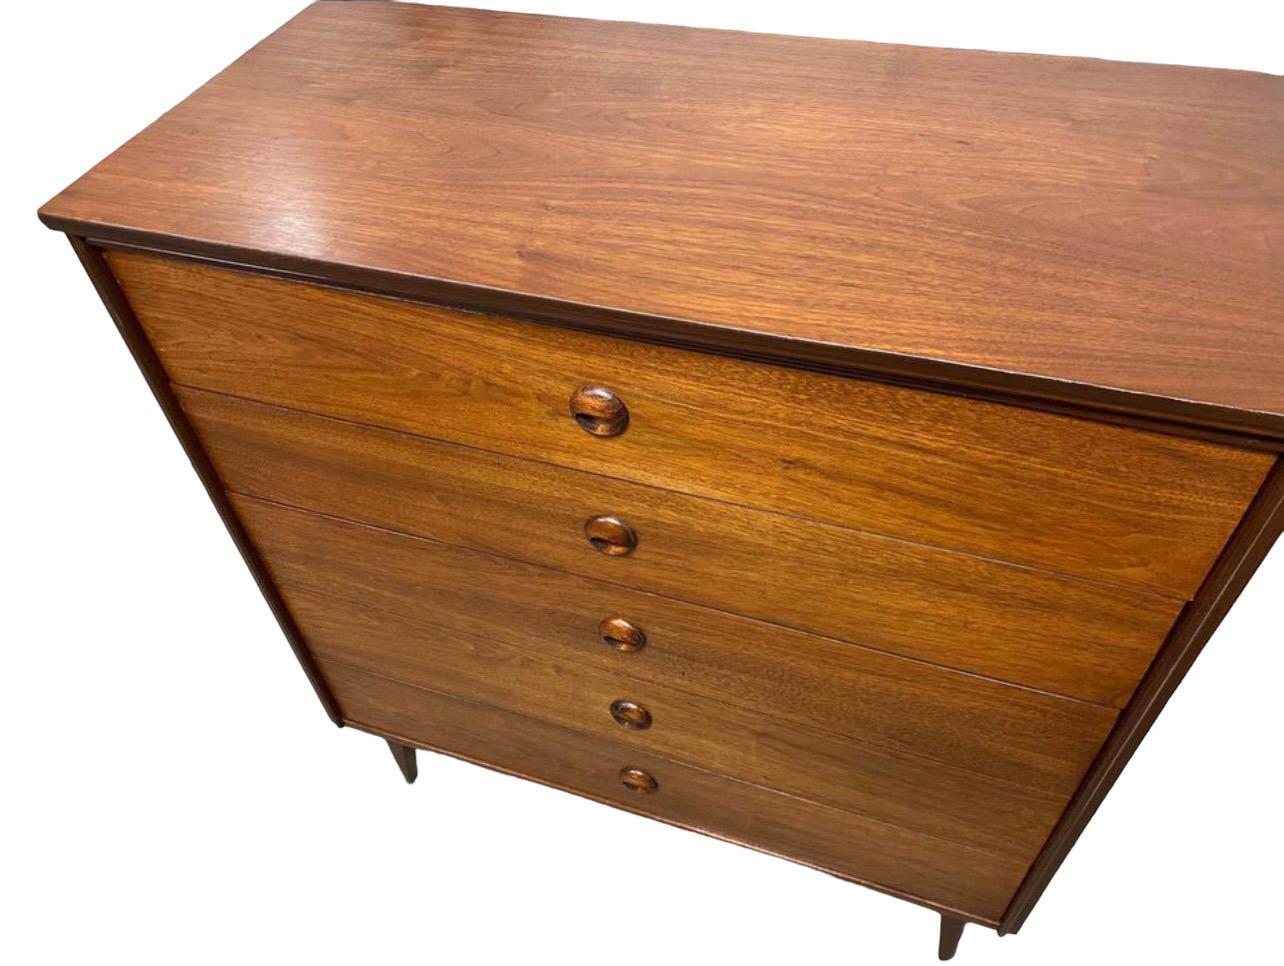 Late 20th Century Vintage Mid Century Modern 4 Drawer Dresser Dovetail Drawers by Basset